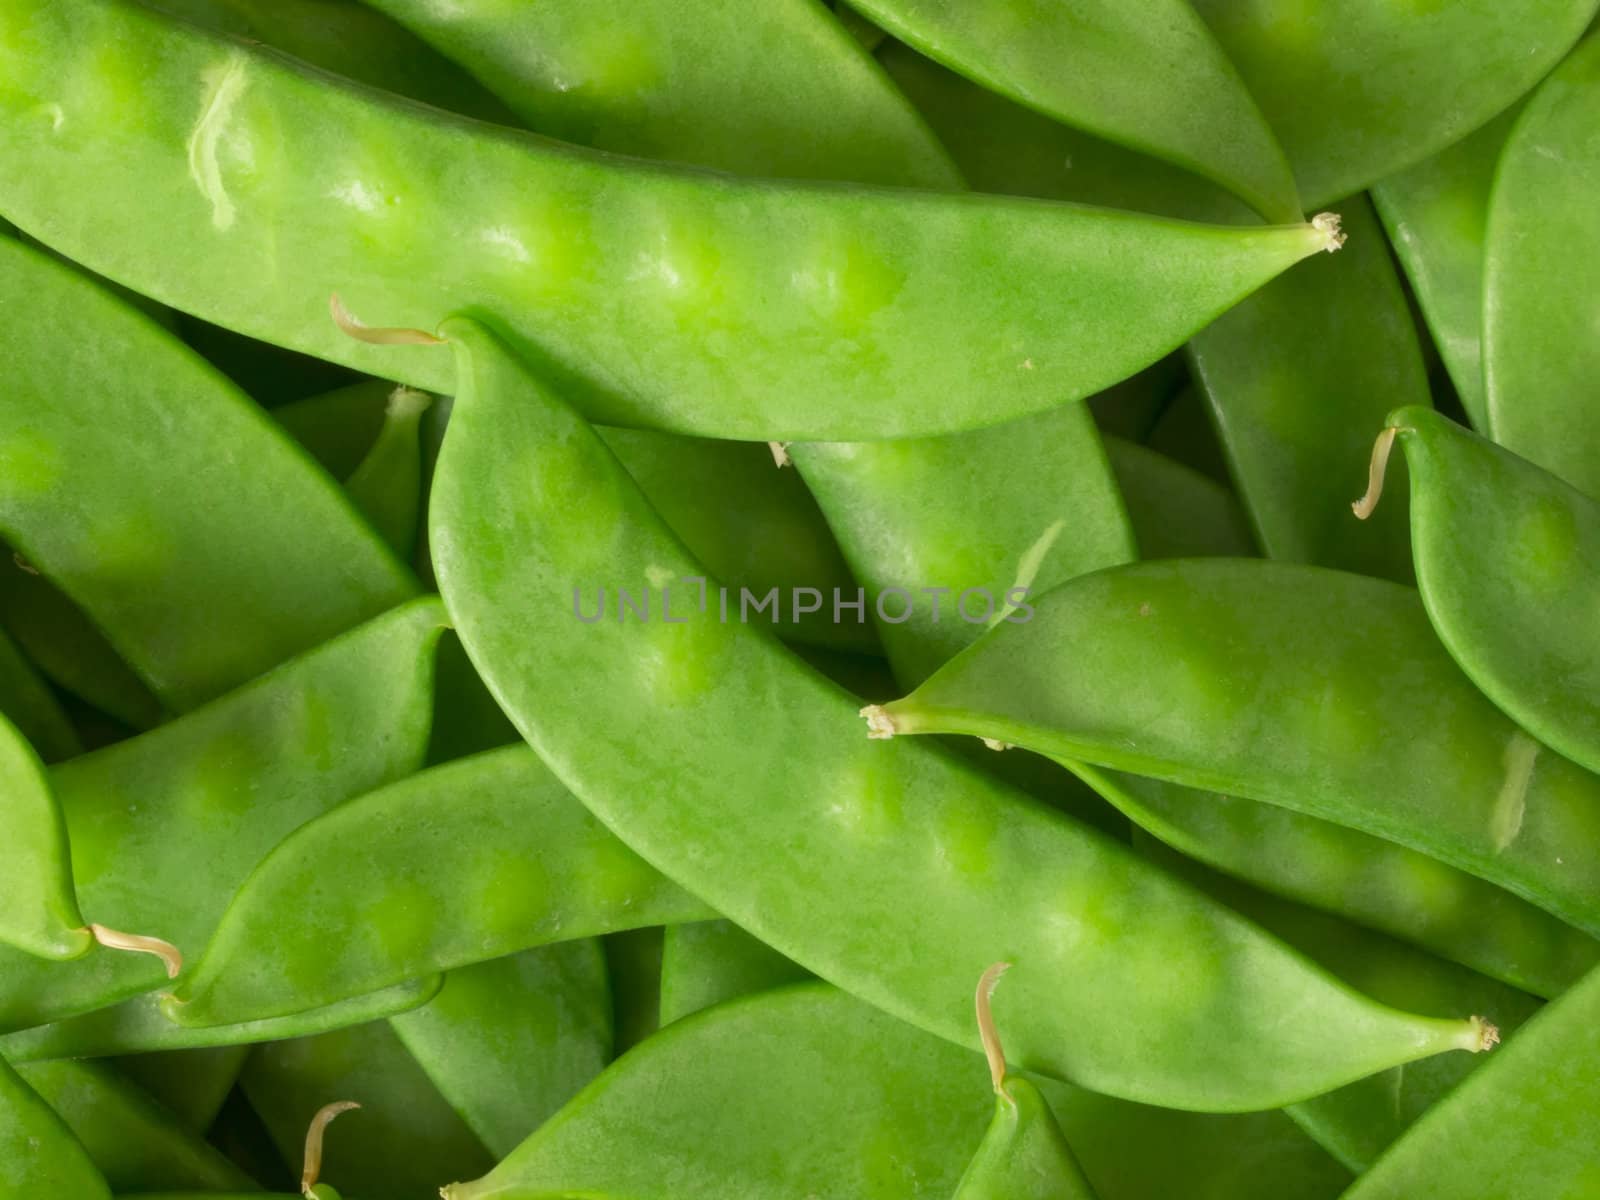 snow peas by zkruger